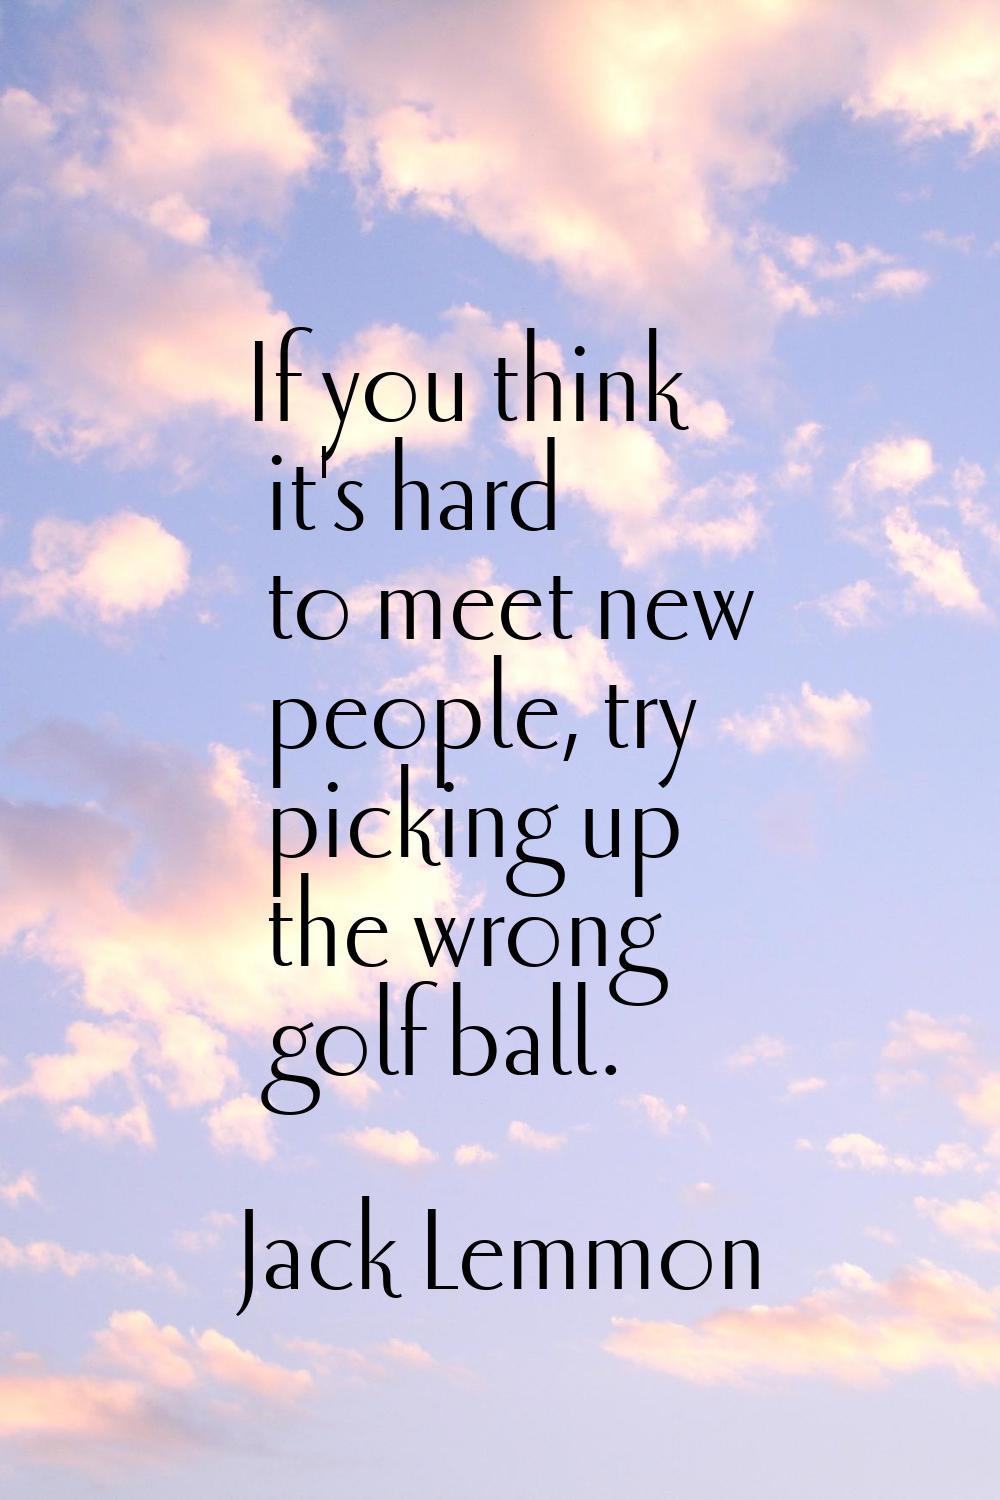 If you think it's hard to meet new people, try picking up the wrong golf ball.